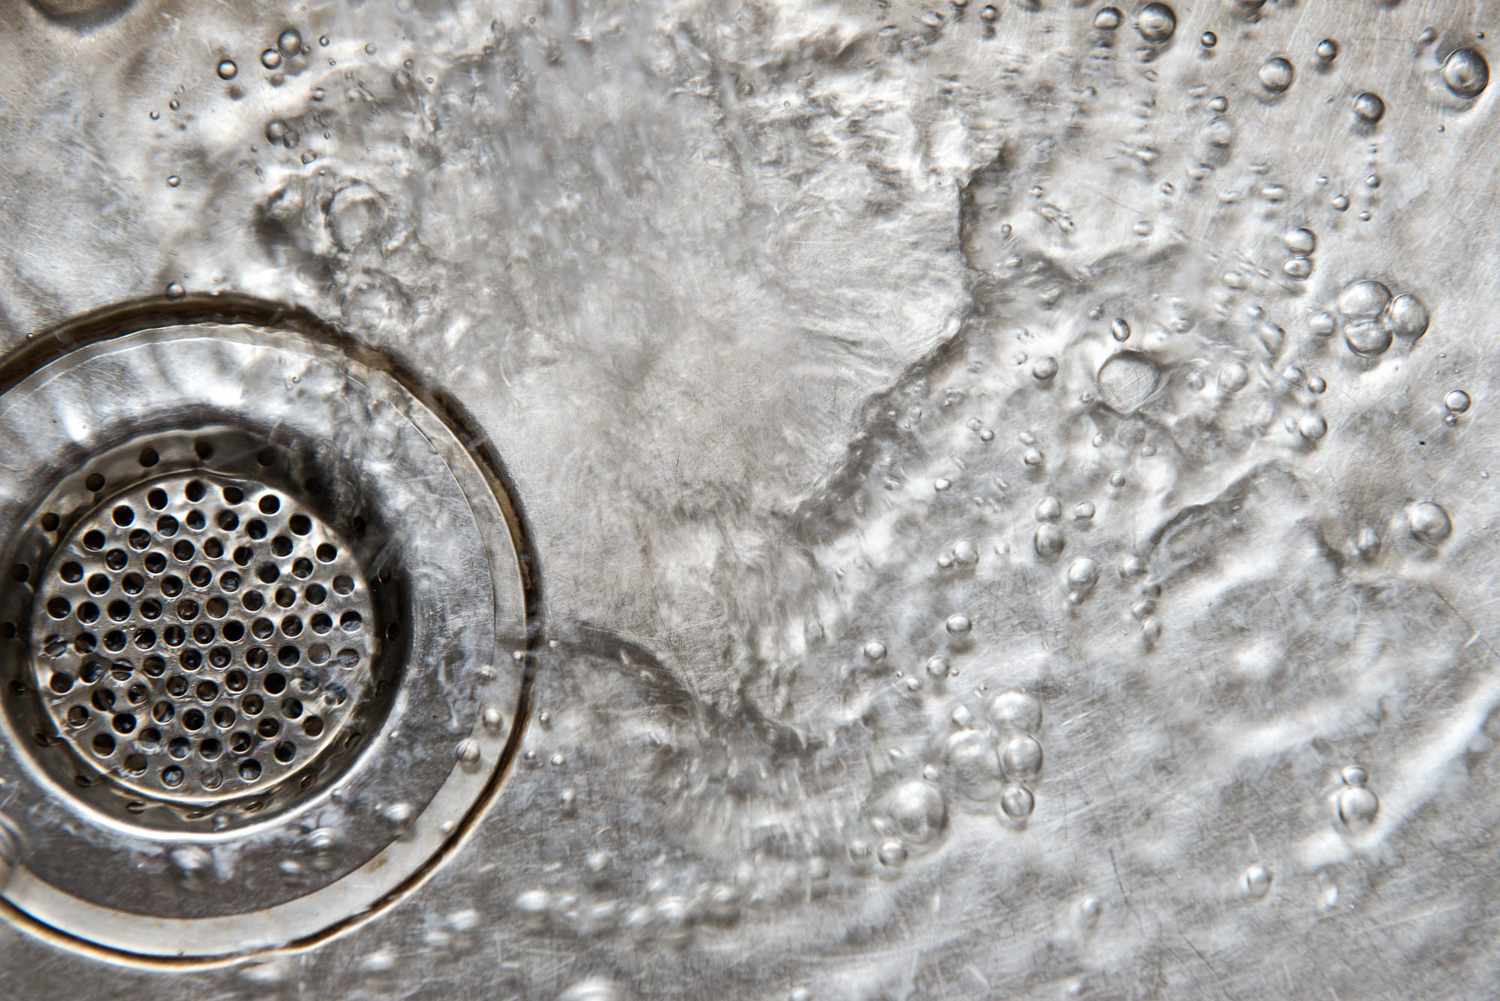 How to Unclog a Drain, Without Chemicals